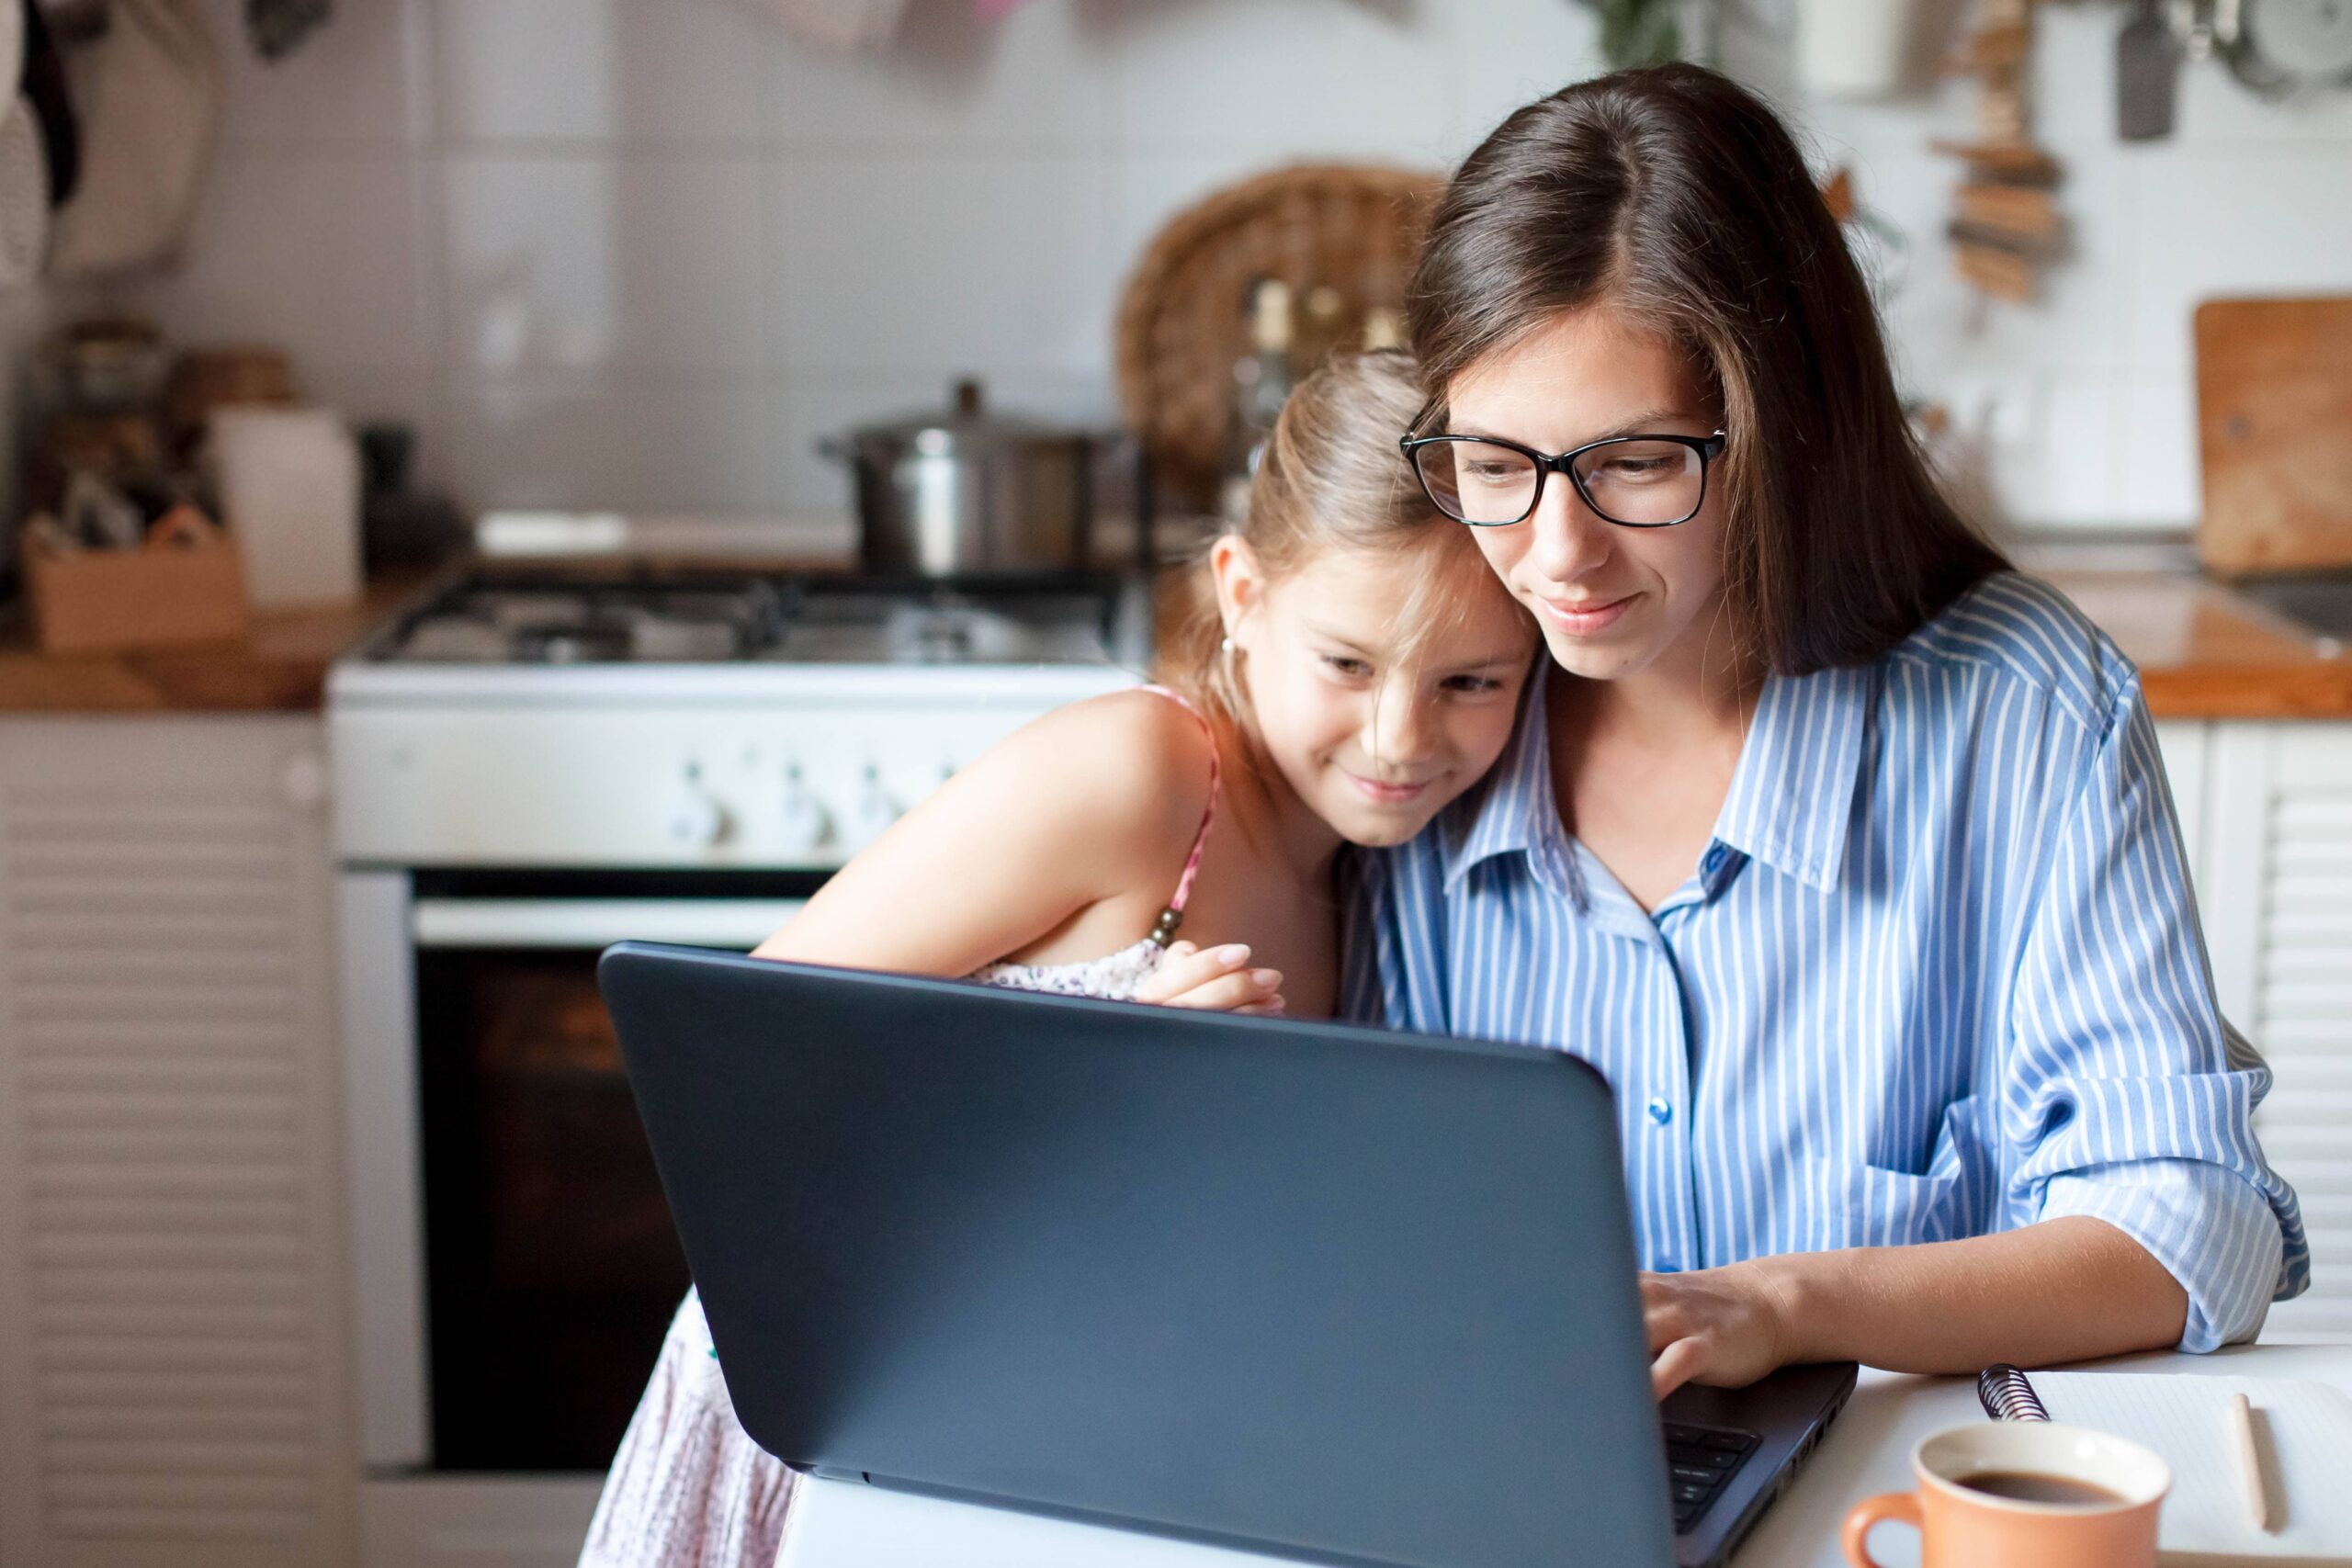 A Mother and Daughter look happy as they use a laptop in their kitchen at home